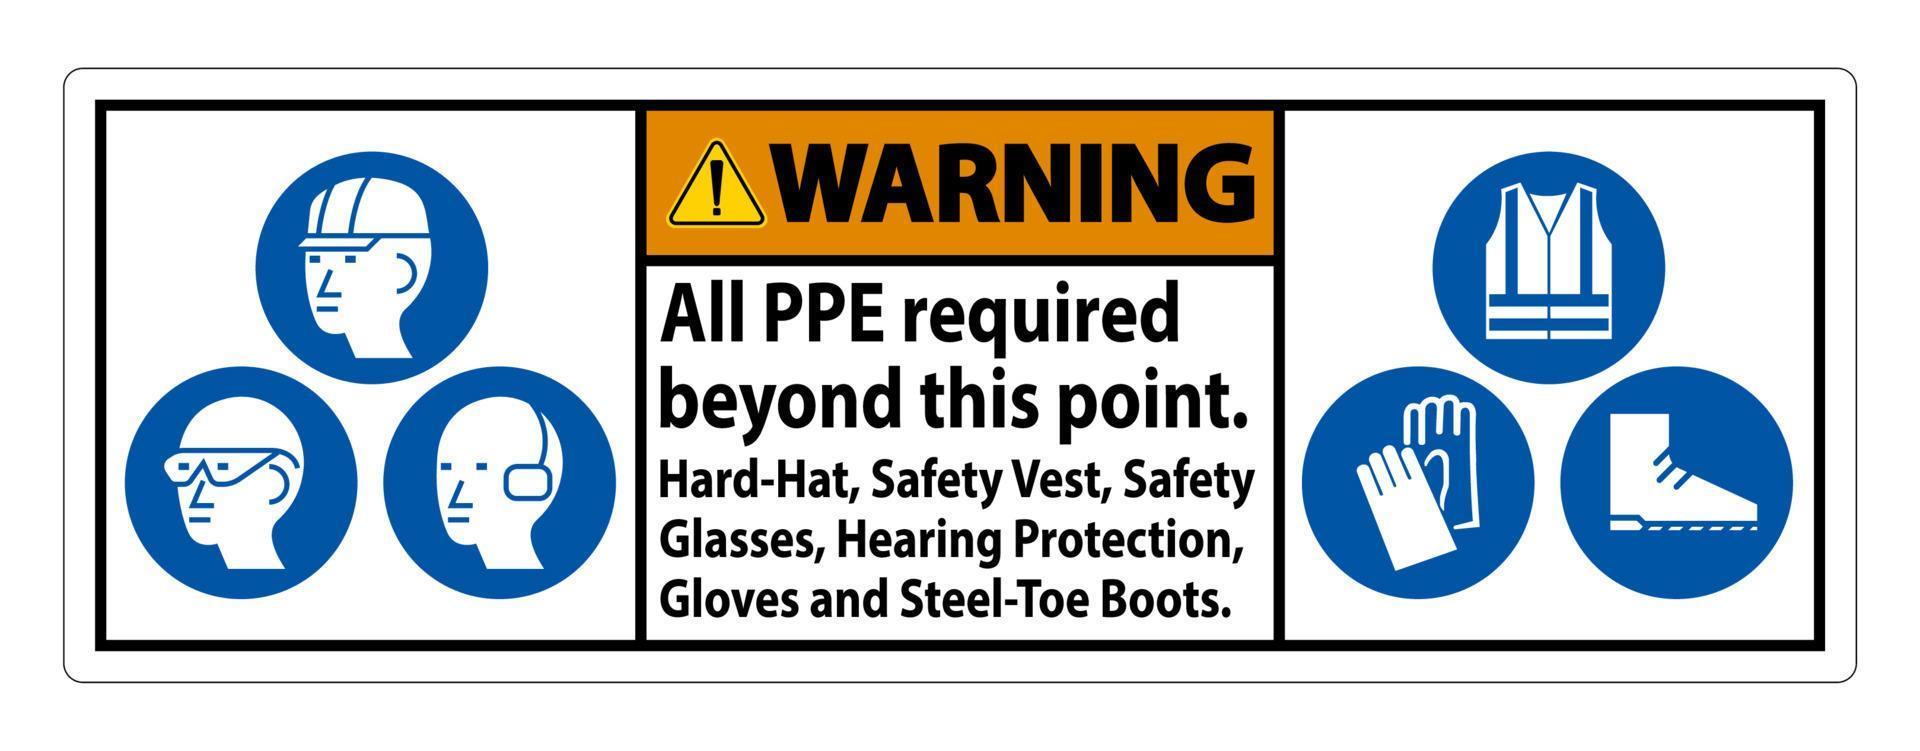 Warning PPE Required Beyond This Point. Hard Hat, Safety Vest, Safety Glasses, Hearing Protection vector